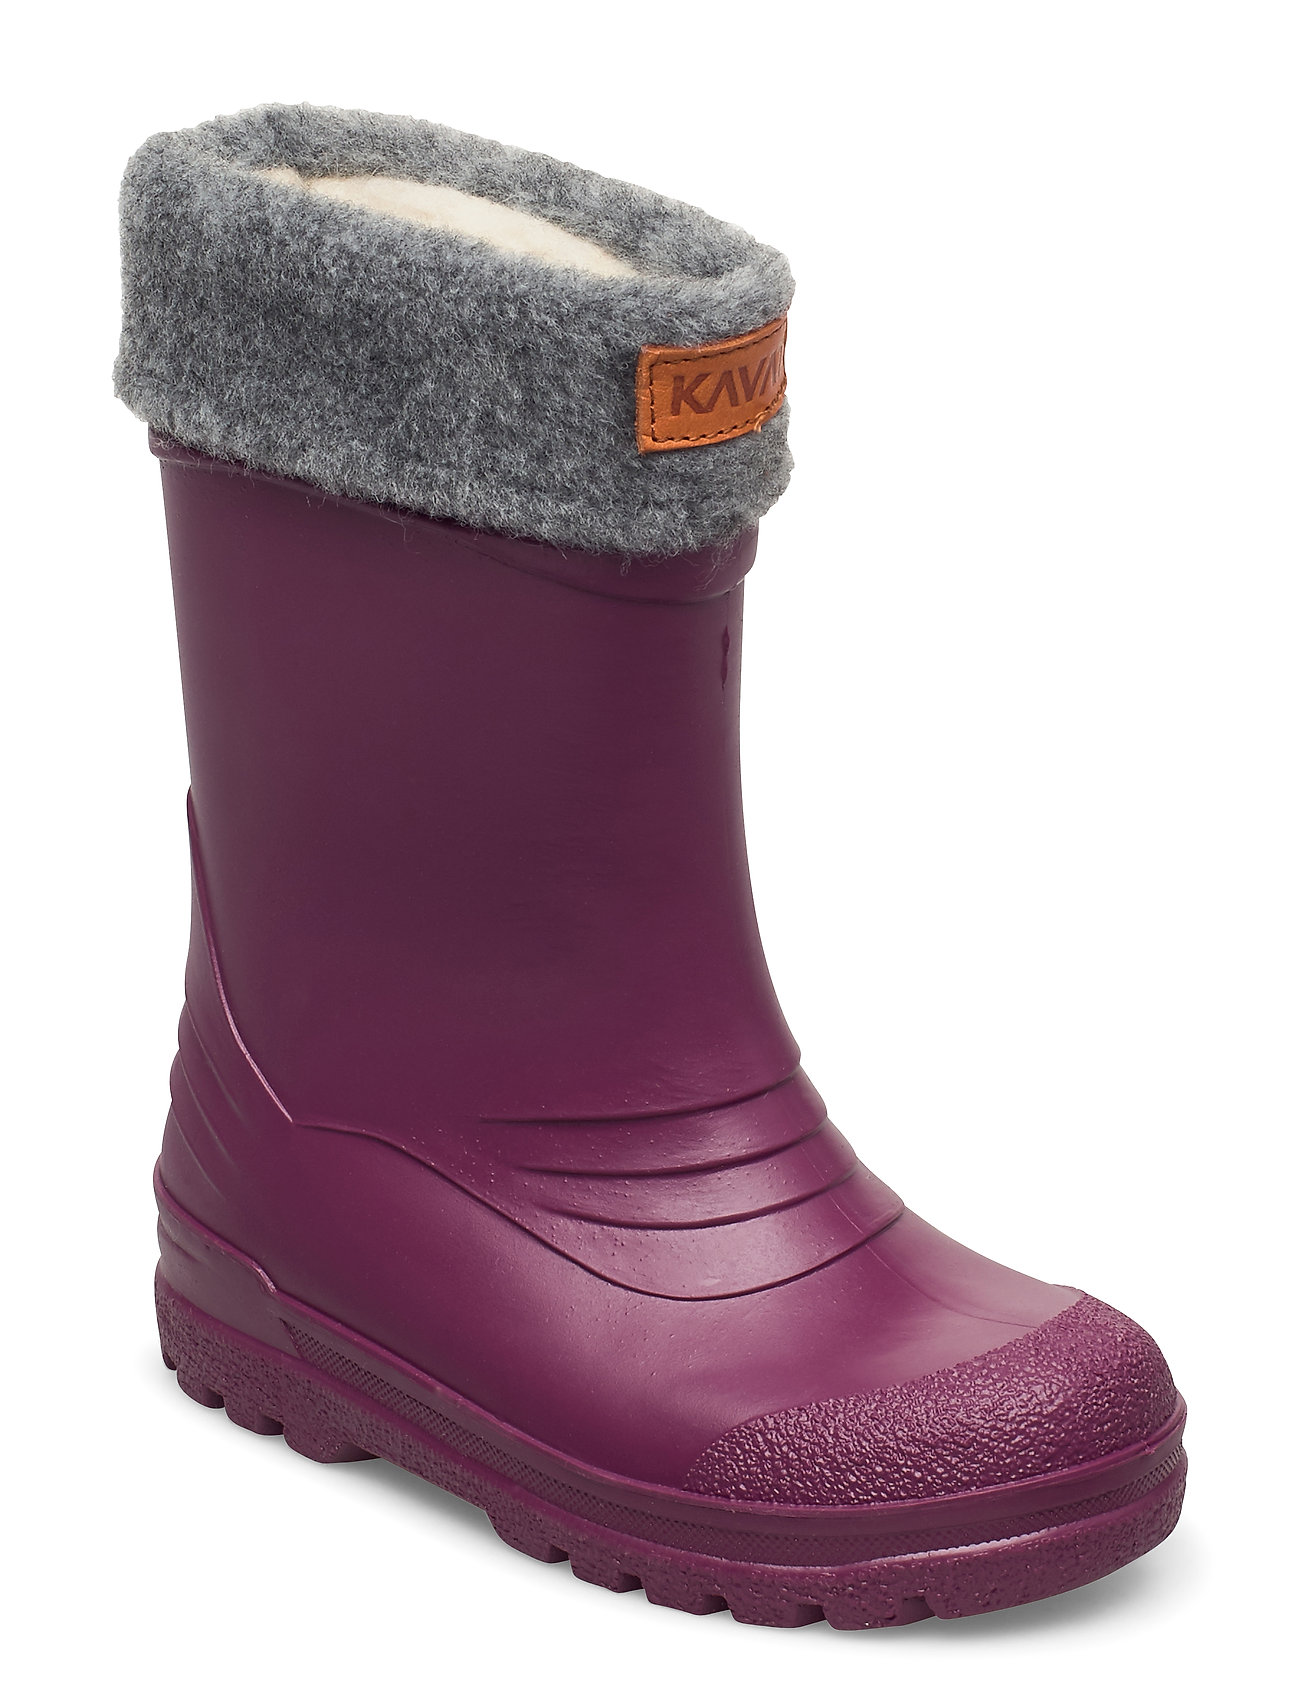 Gimo Wp Shoes Rubberboots Lined Rubberboots Liila Kavat